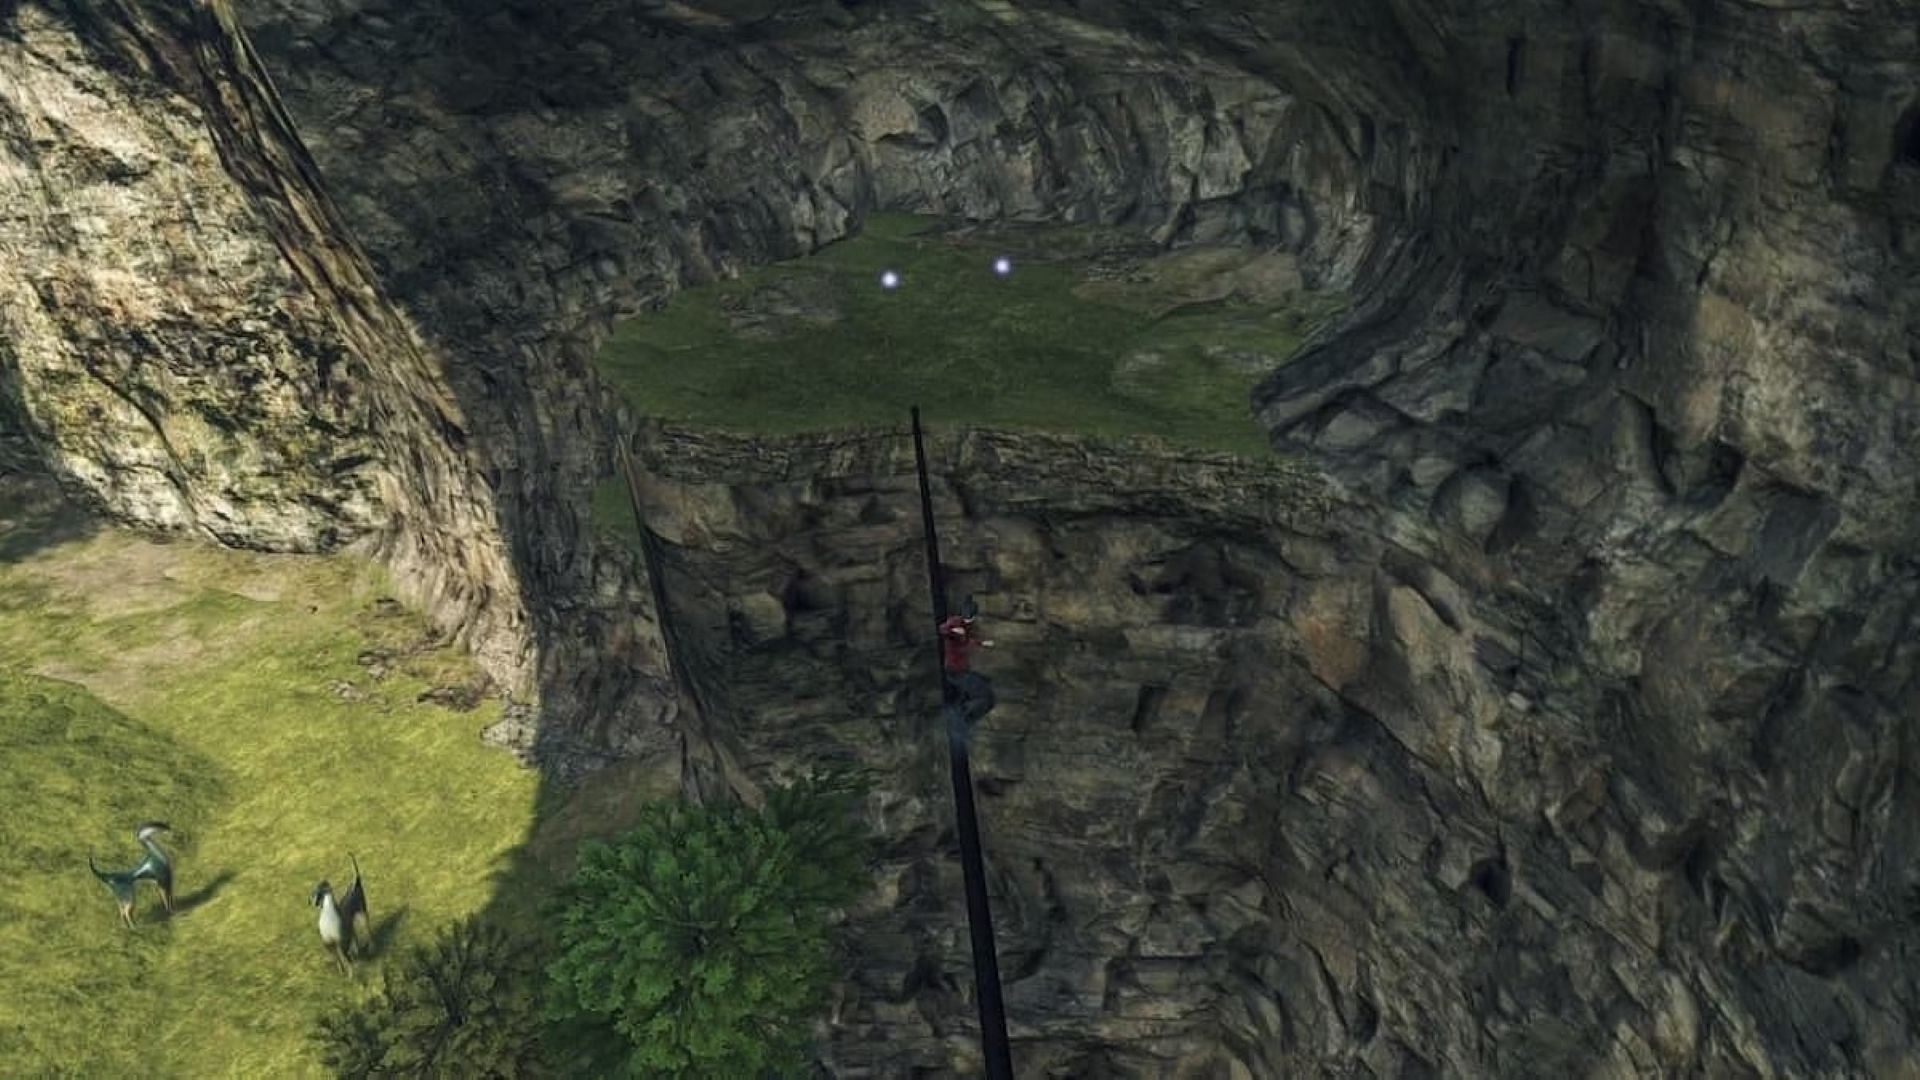 Riding across ziplines is a Party Skill in Xenoblade Chronicles 3 (Image via Nintendo)